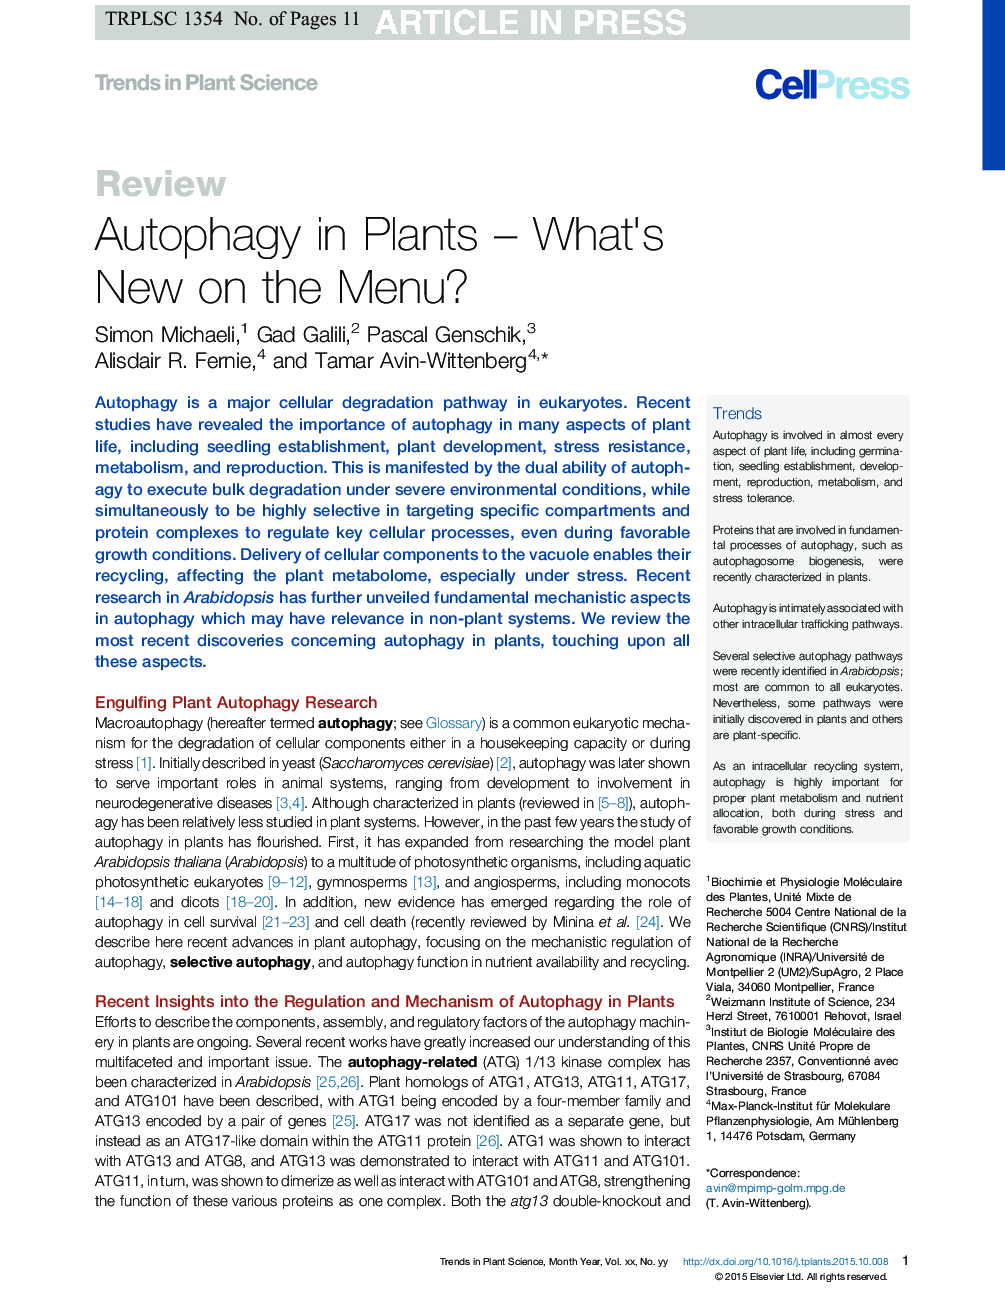 Autophagy in Plants - What's New on the Menu?